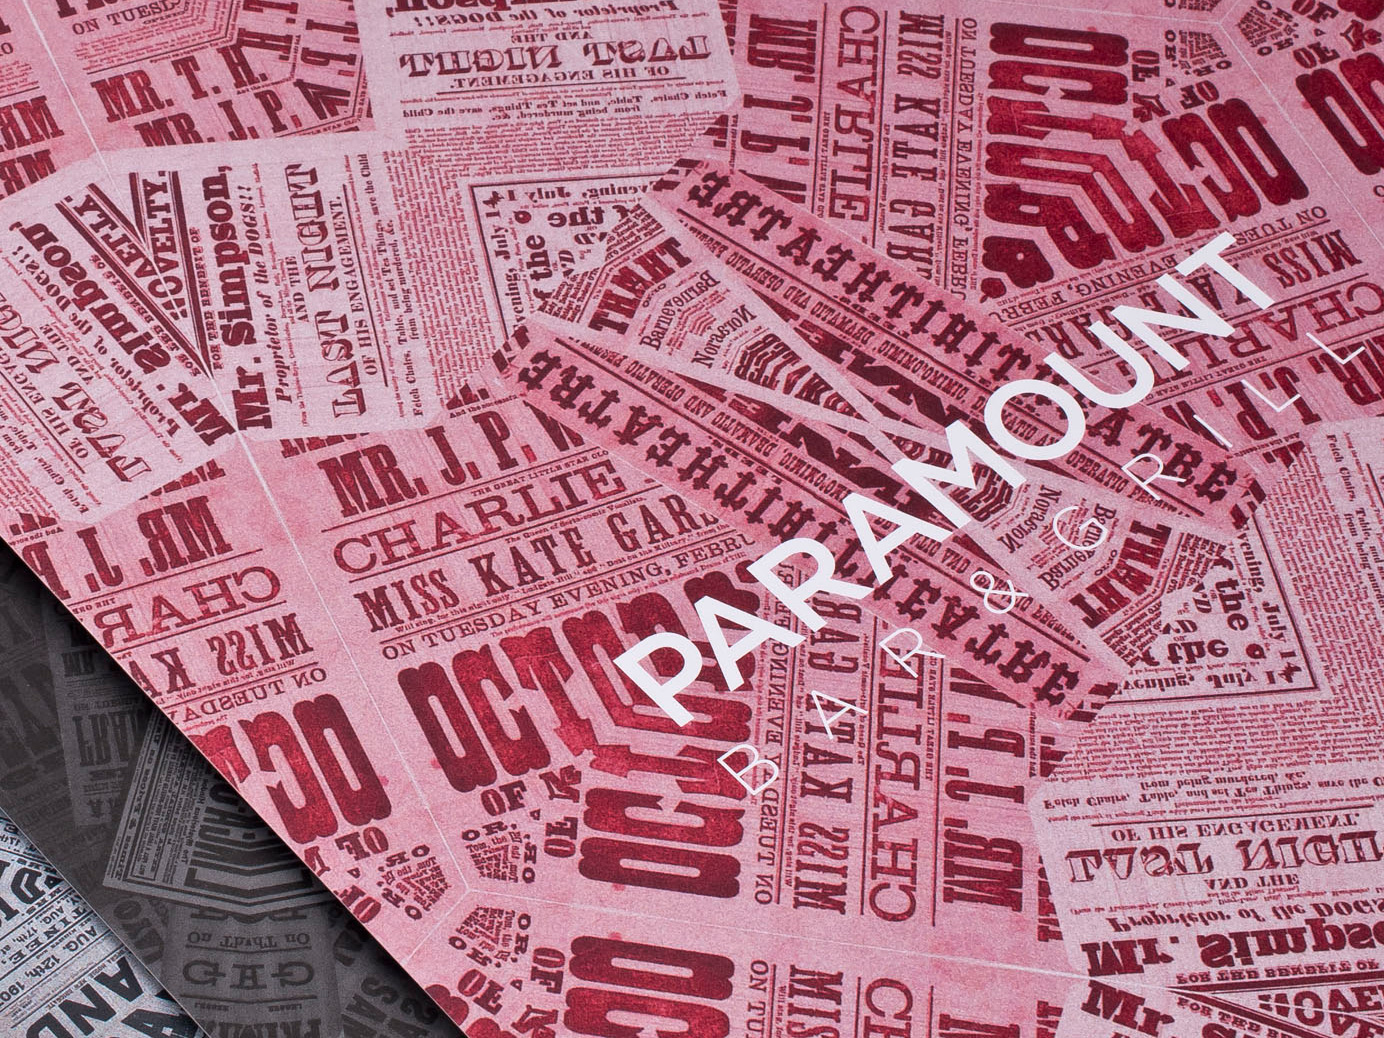 Print collateral for Paramount Bar & Grill